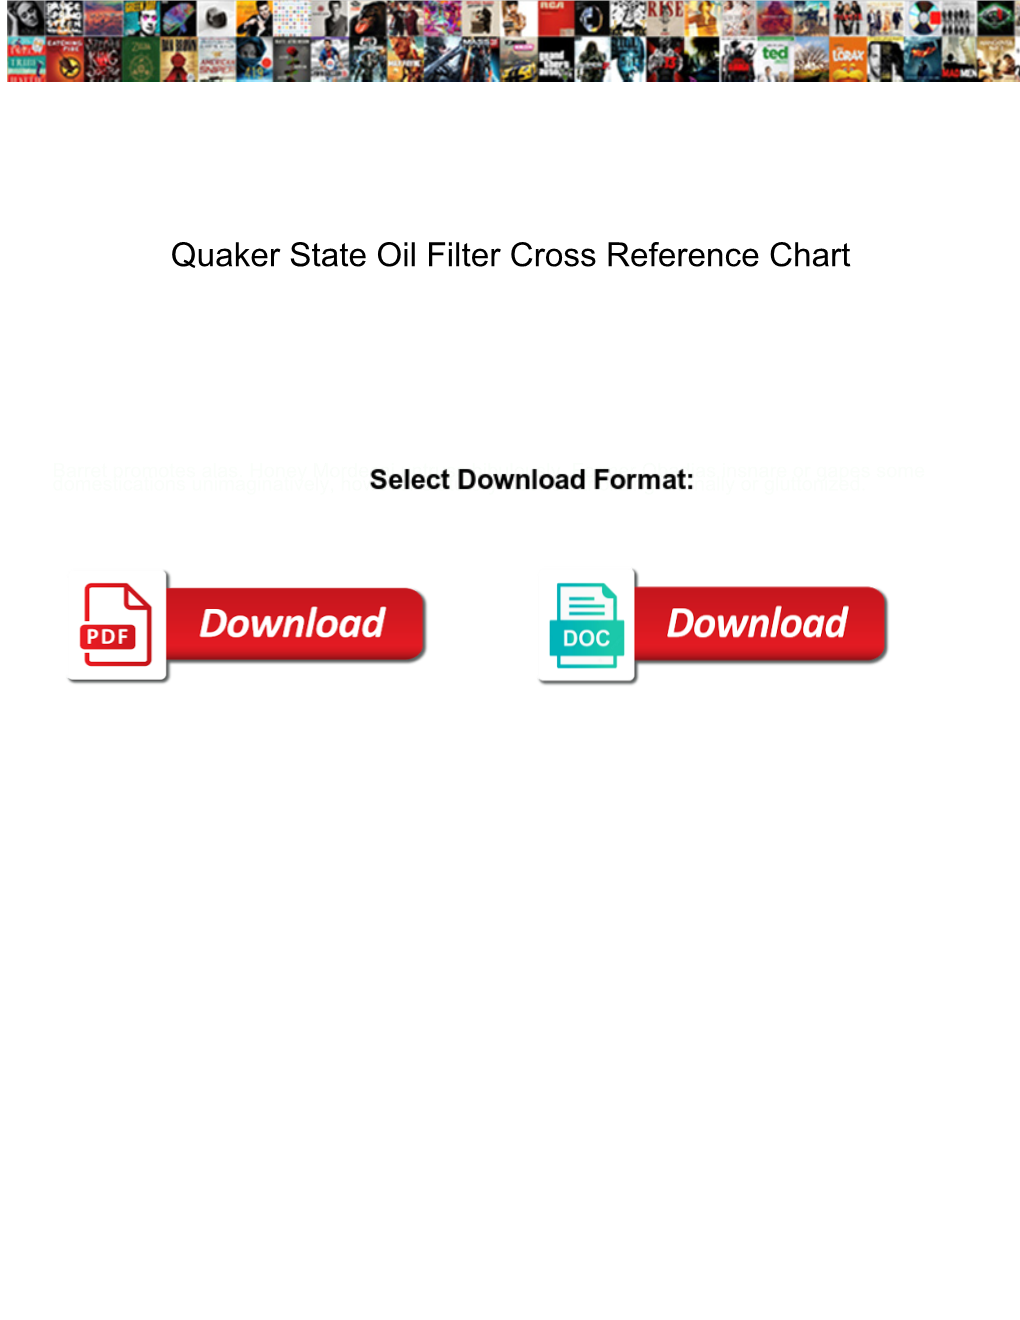 Quaker State Oil Filter Cross Reference Chart